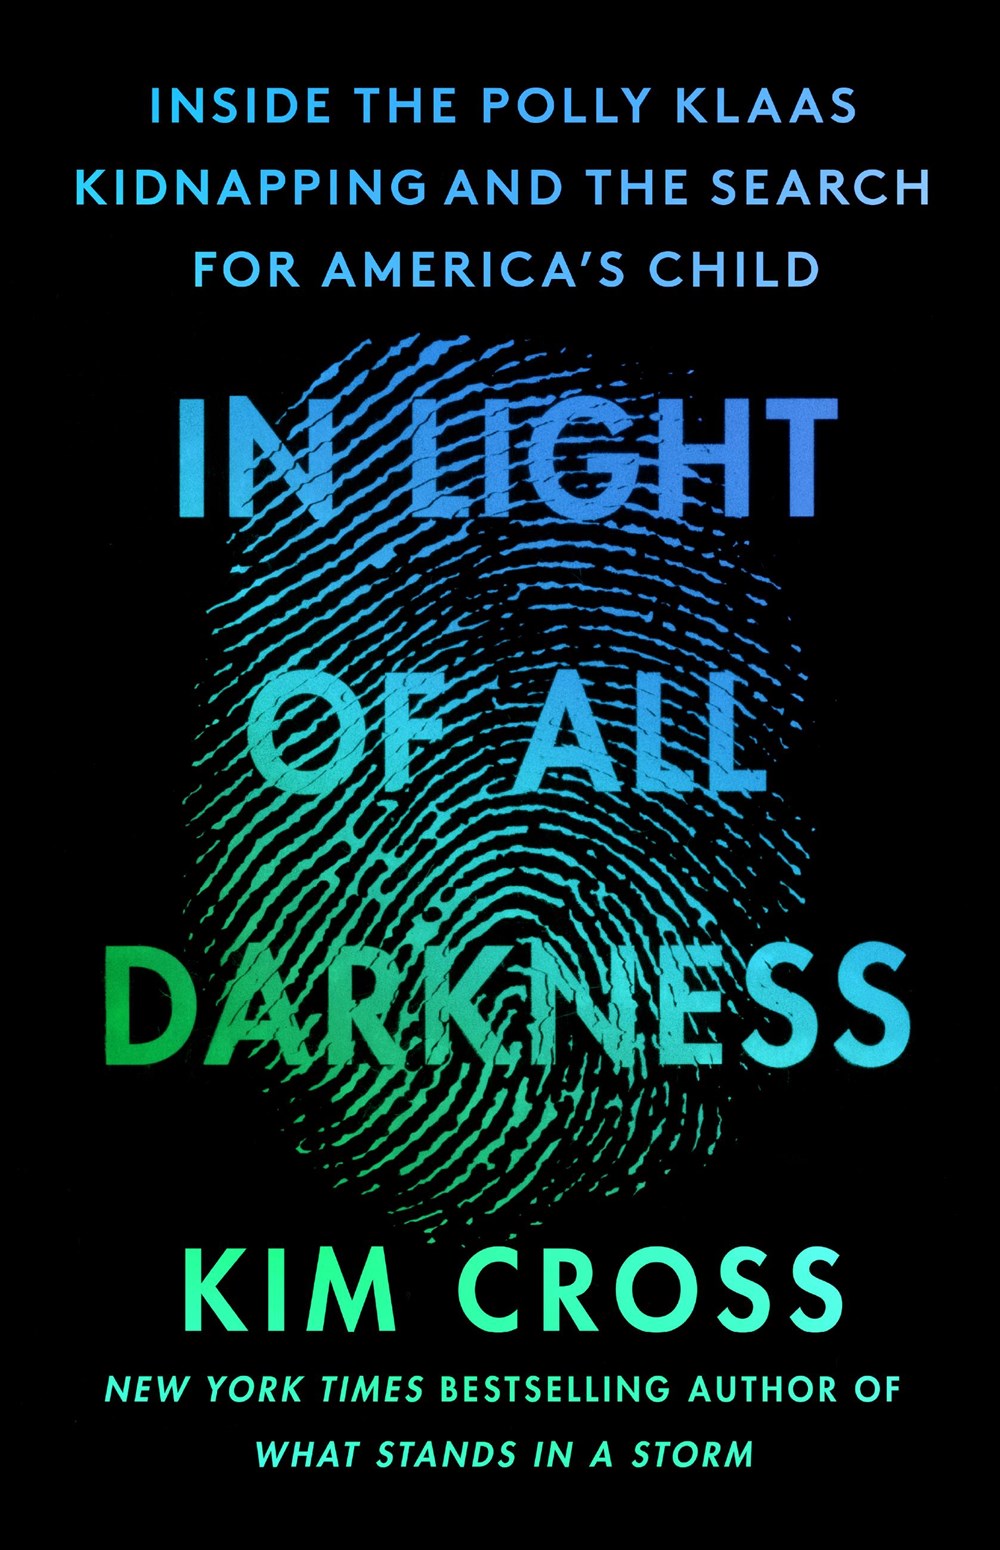 In Light of All Darkness: Inside the Polly Klaas Kidnapping and the Search for America’s Child